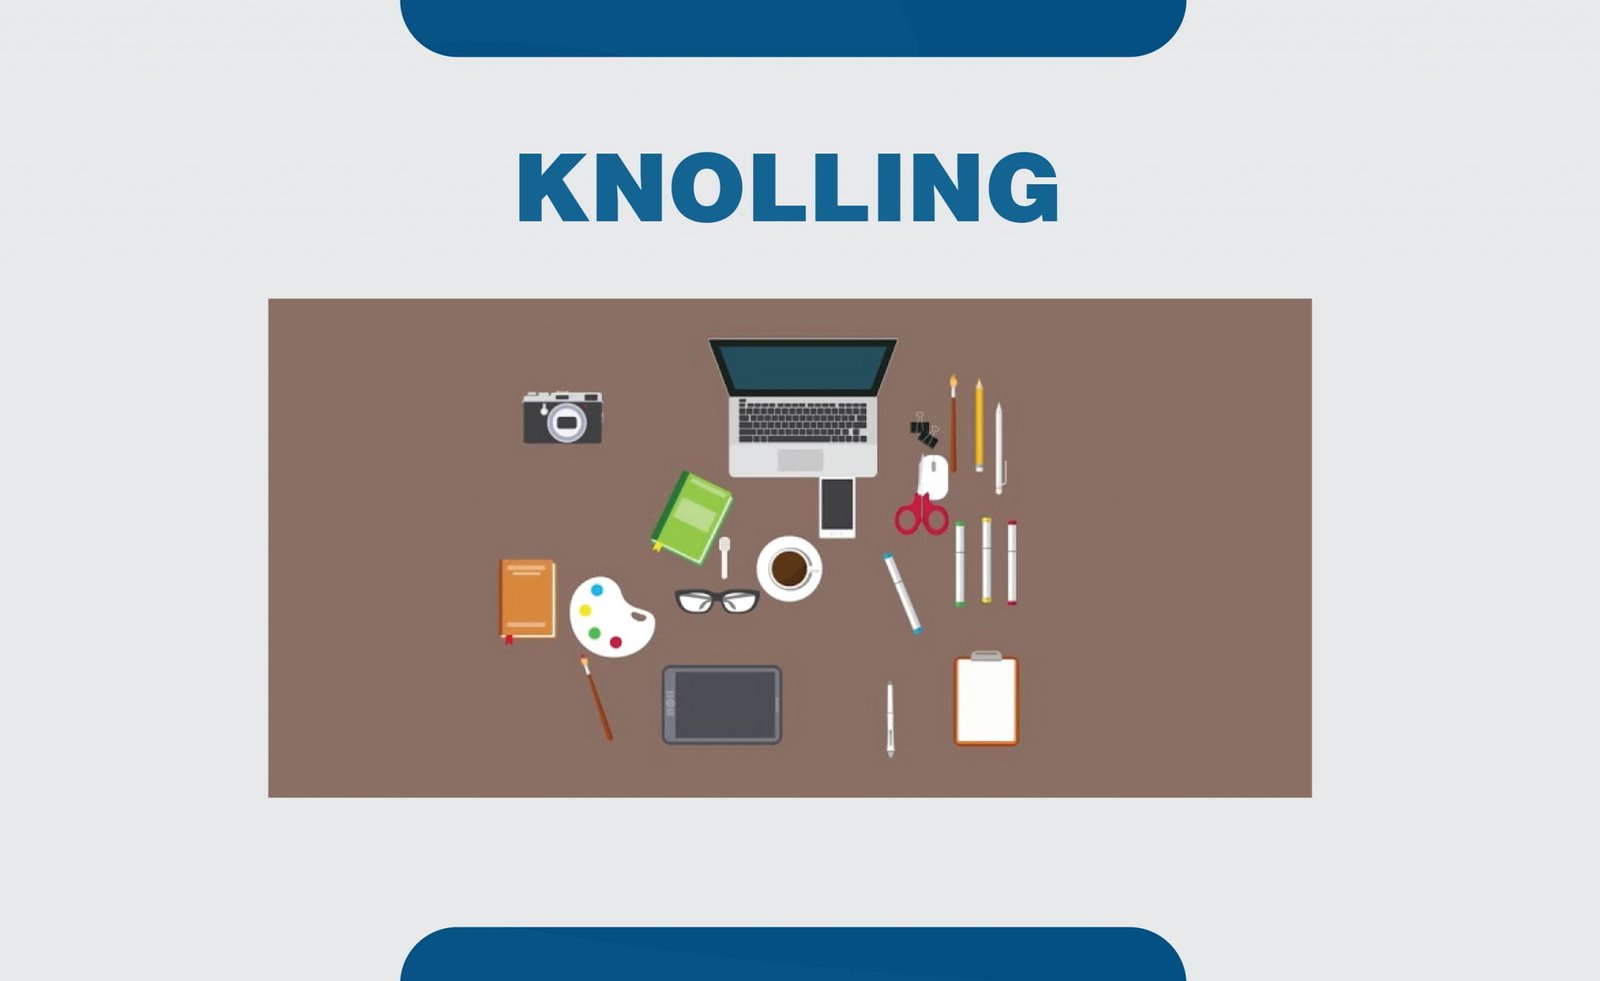 Knolling